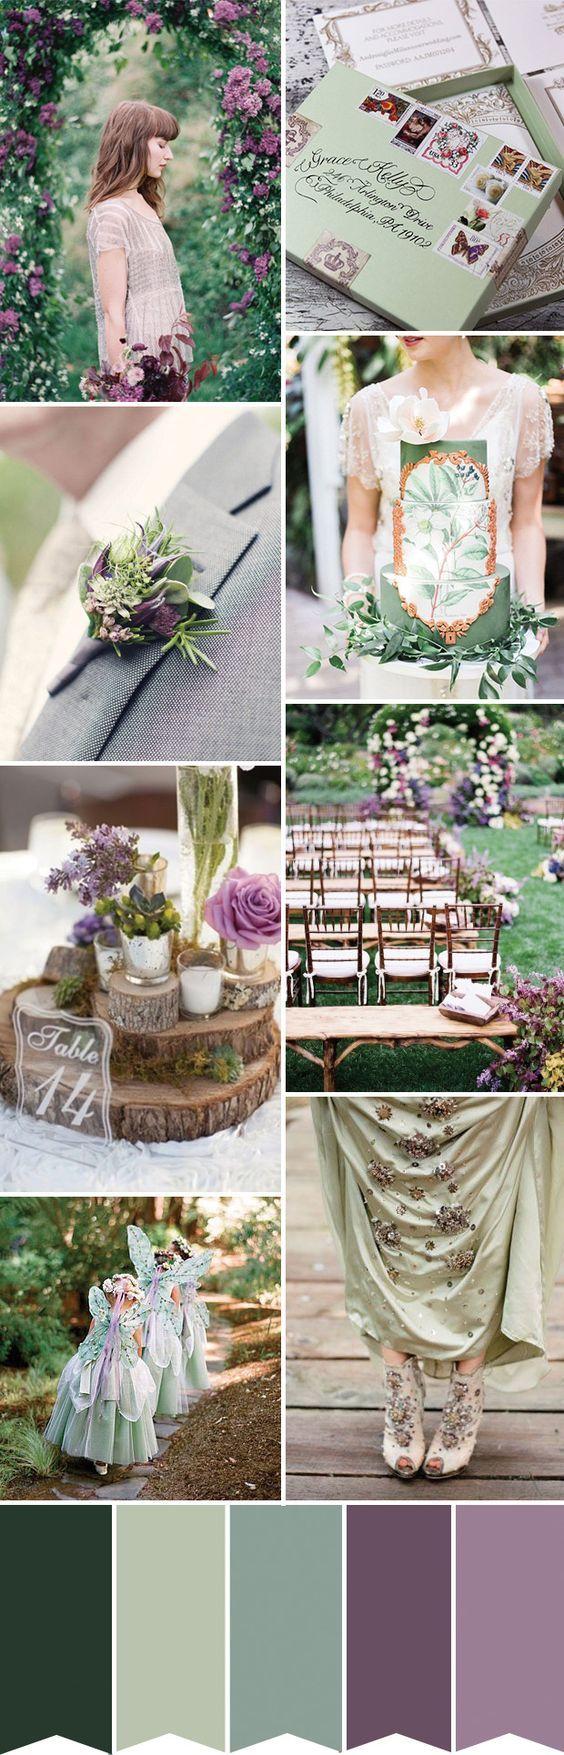 Wedding - A Fairytale Grean And Purple Wedding Inspiration Palette 